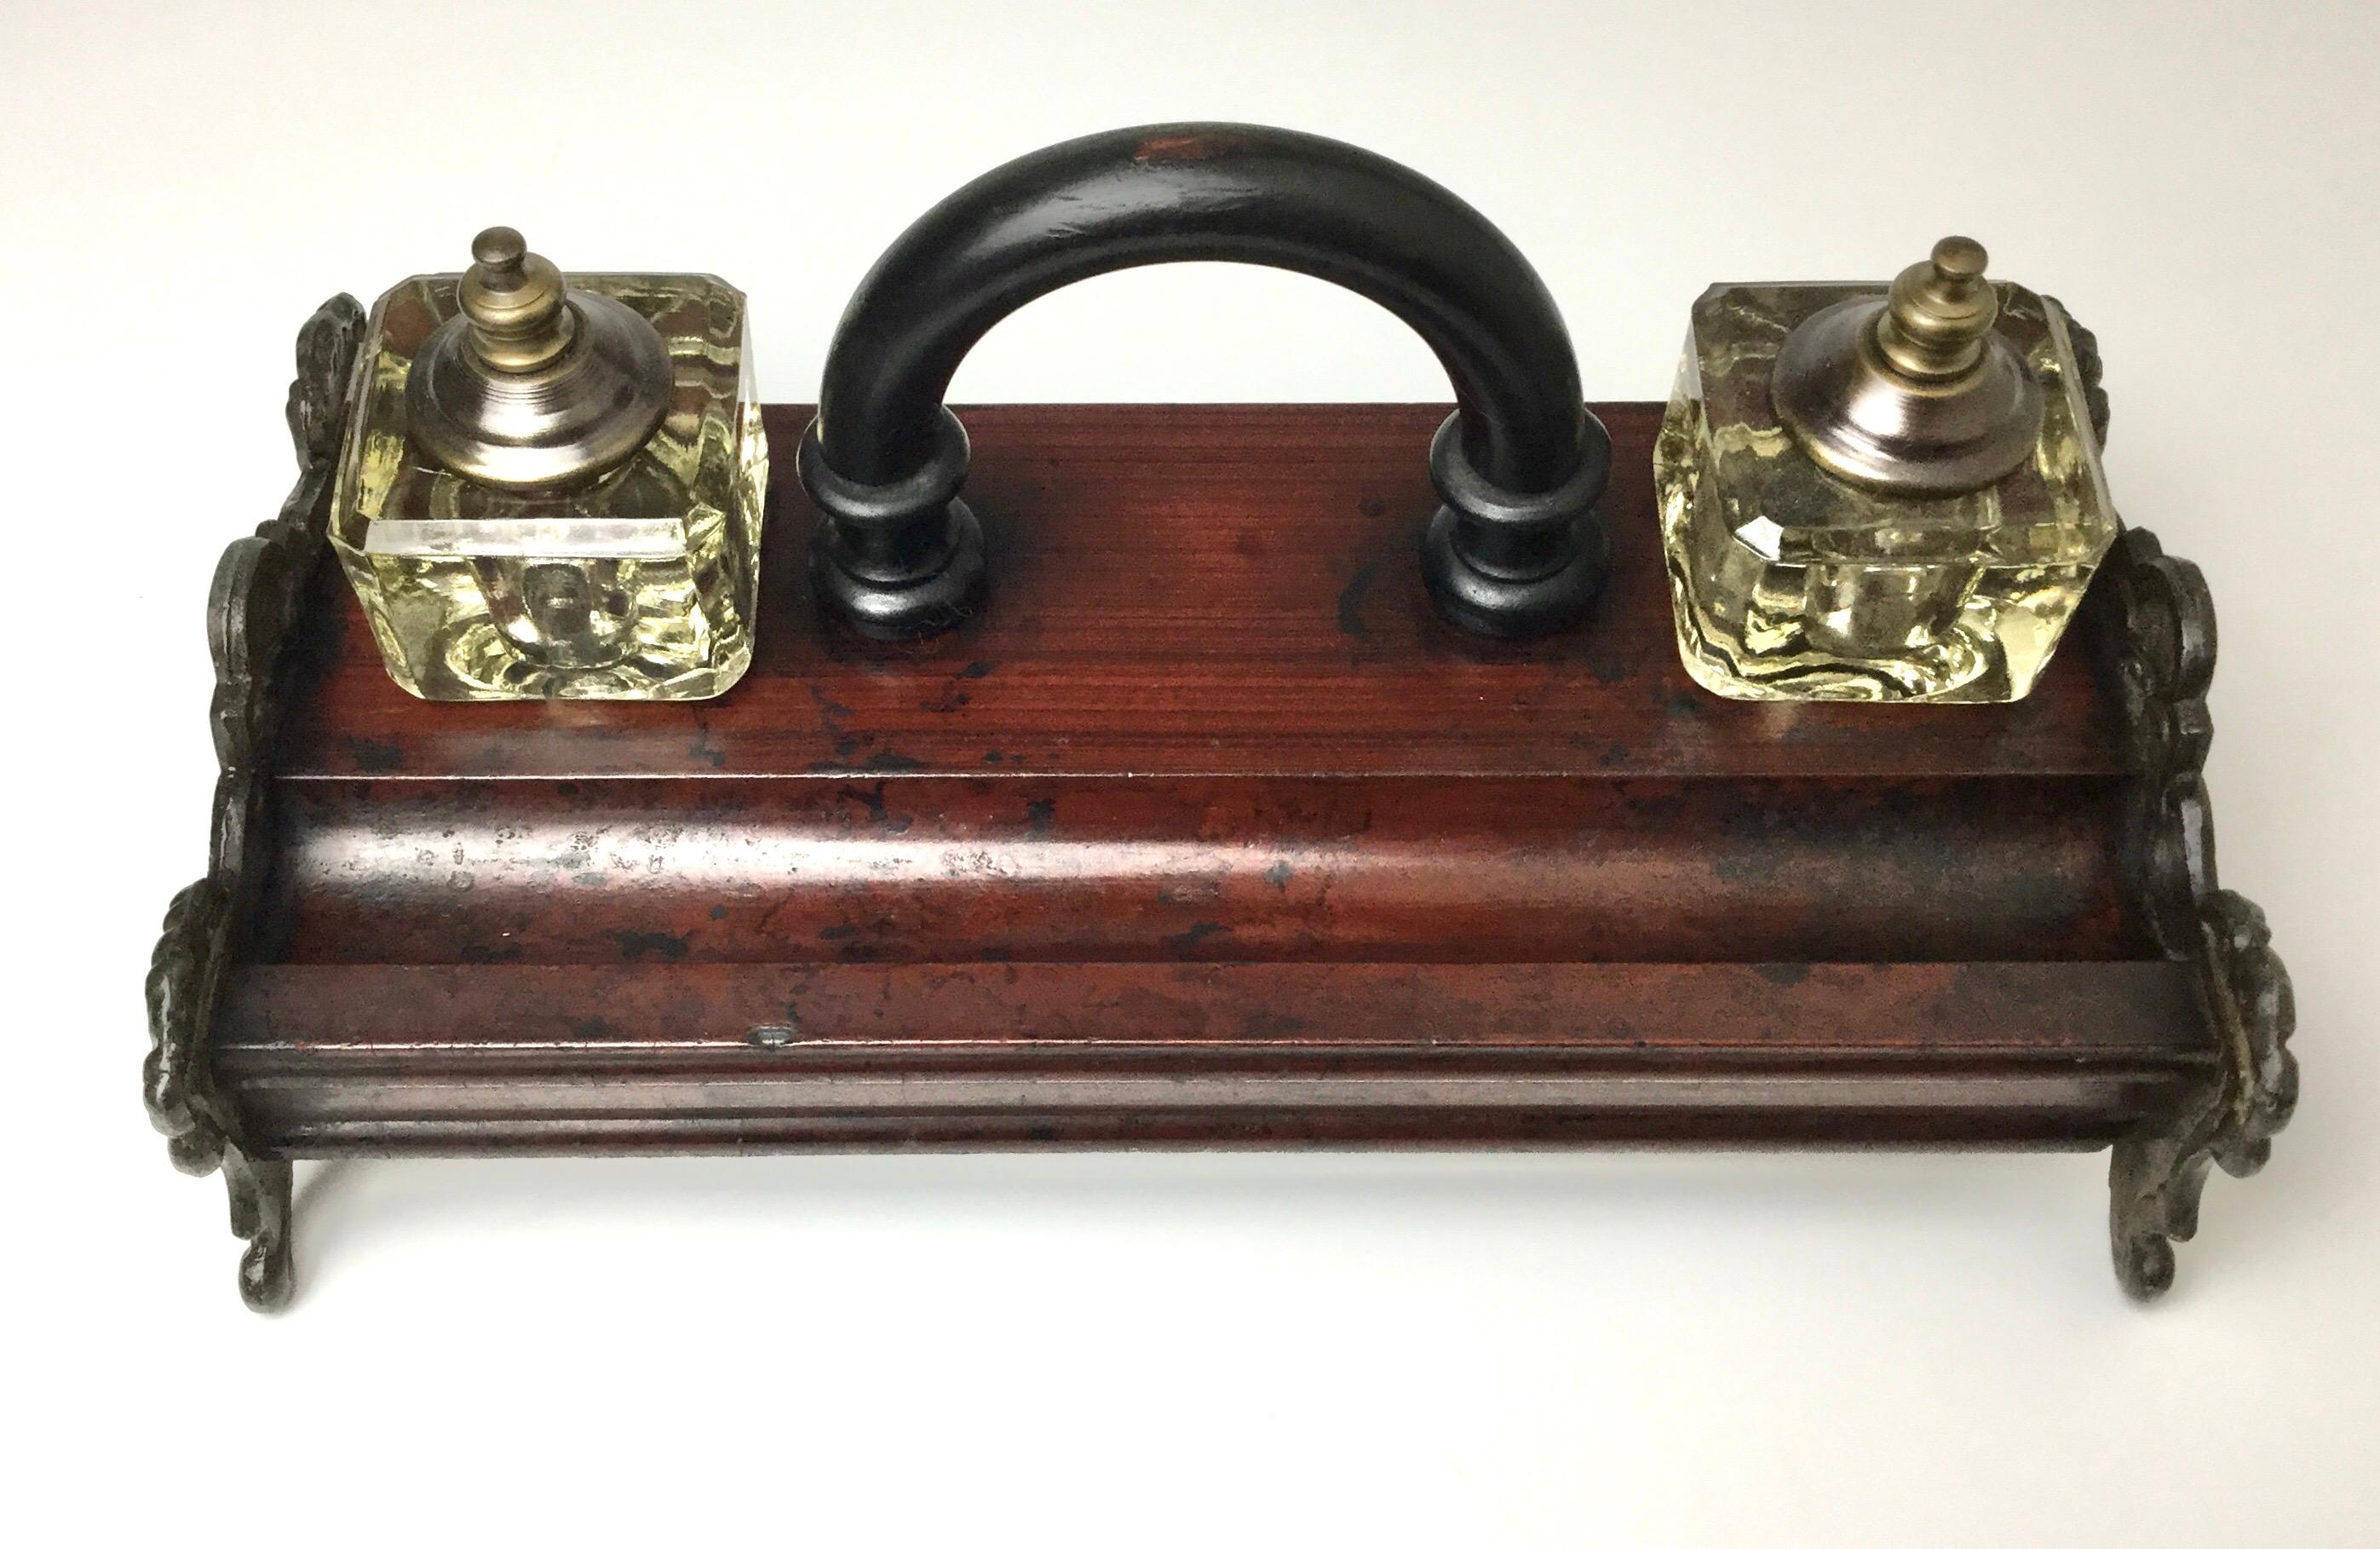 Late 19th century double fitted covered inkwells on what I believe to be cherrywood with cast iron footed sides and black ebony handle. 11' by 6' by 5' tall. Some age appropriate ware and some ink spots. Minor very small chip on corner.